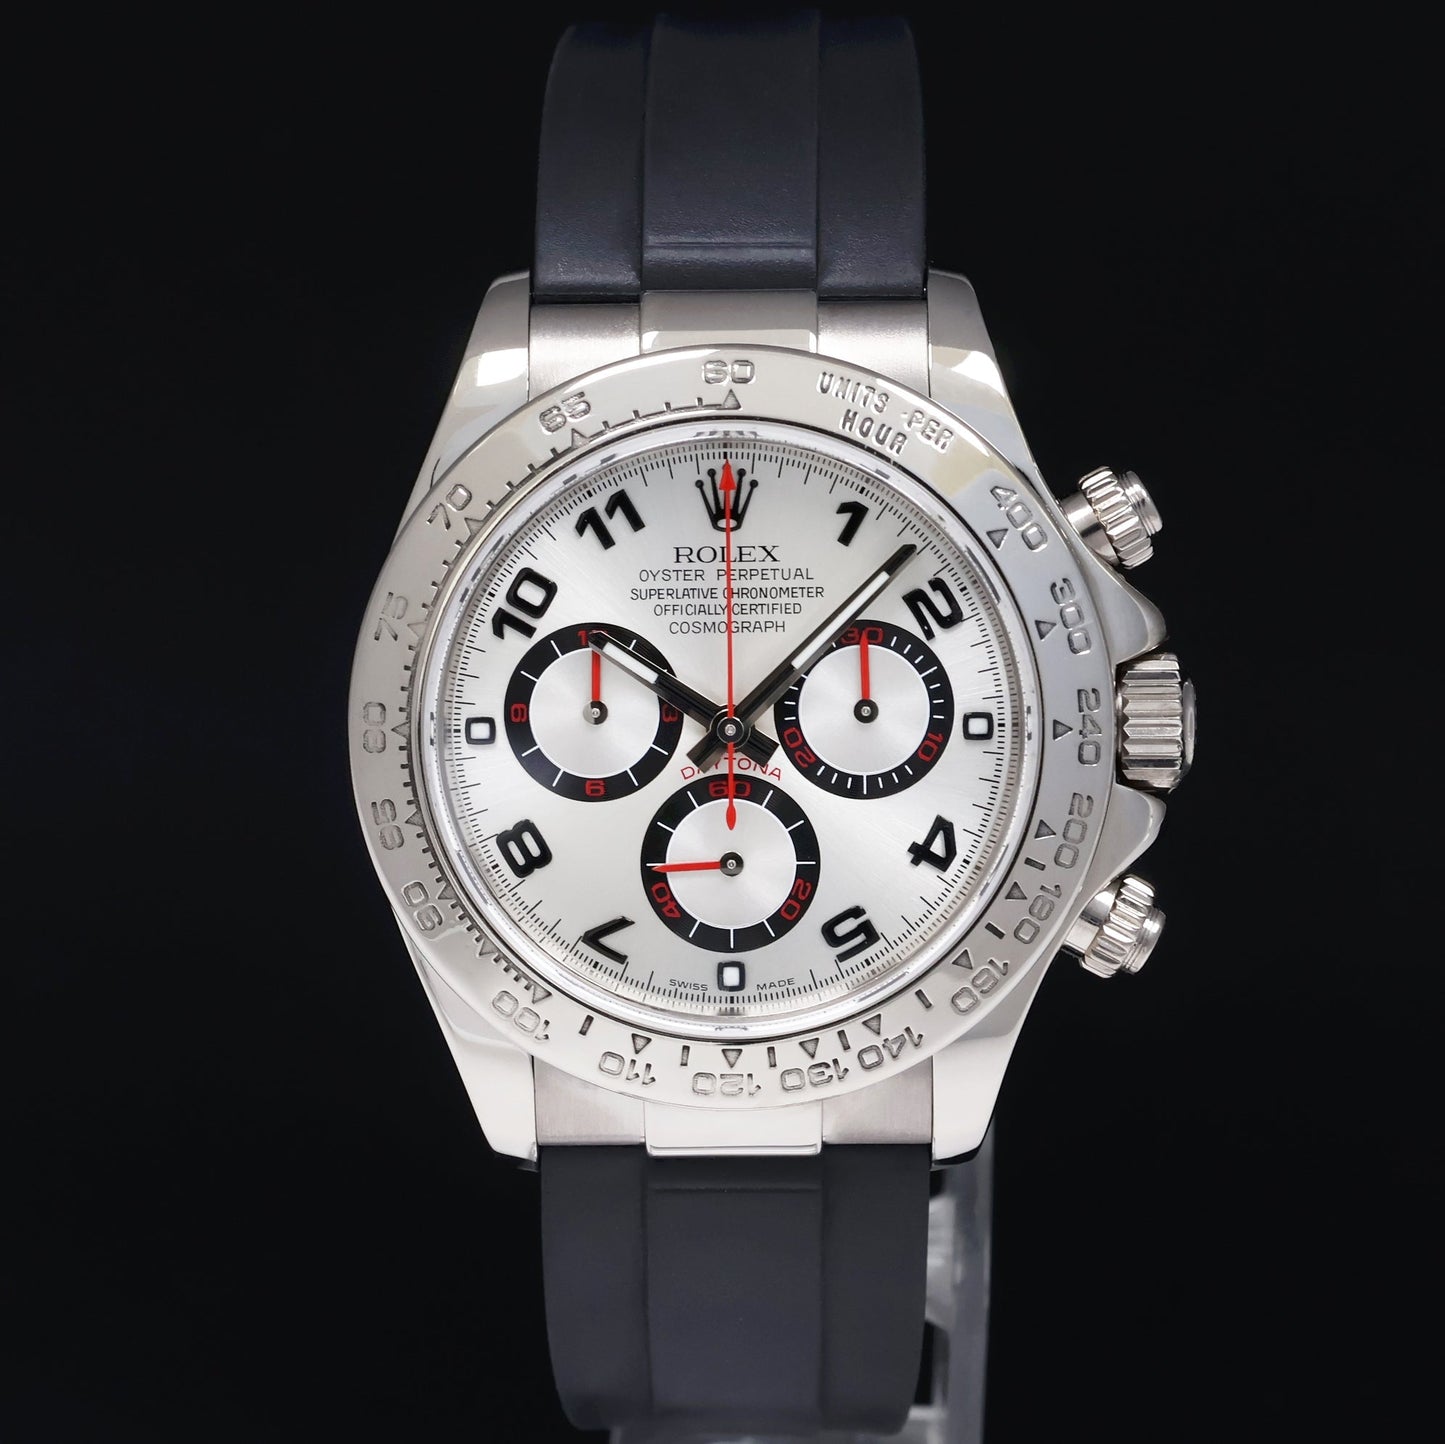 Rolex Daytona White Gold 116519 Silver Red Racing Rubber Chronograph Watch Box